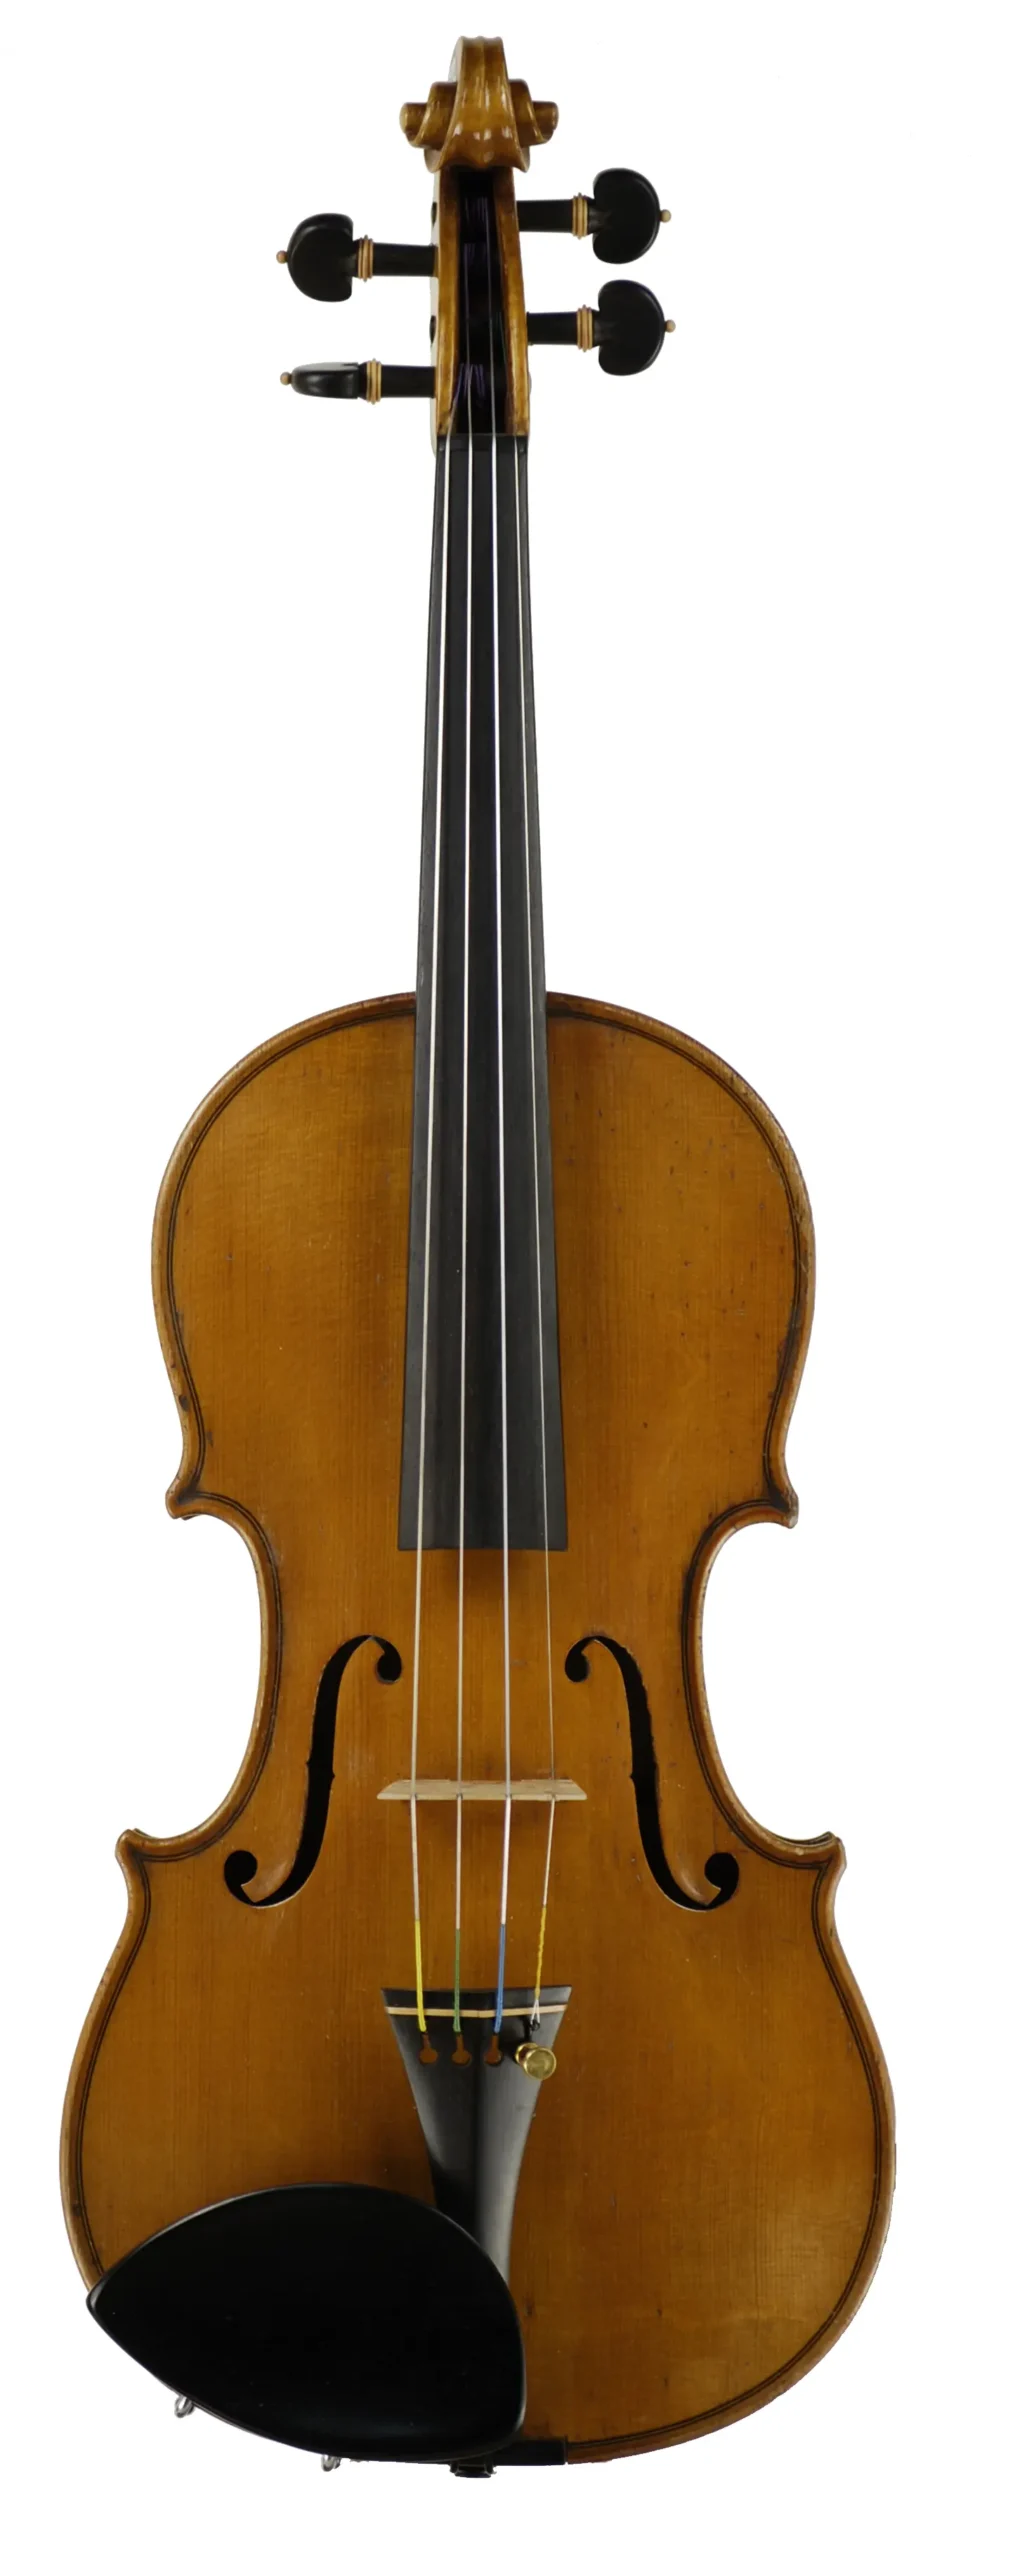 francesco ruggieri violin - Who is the most famous violin makers of Italy